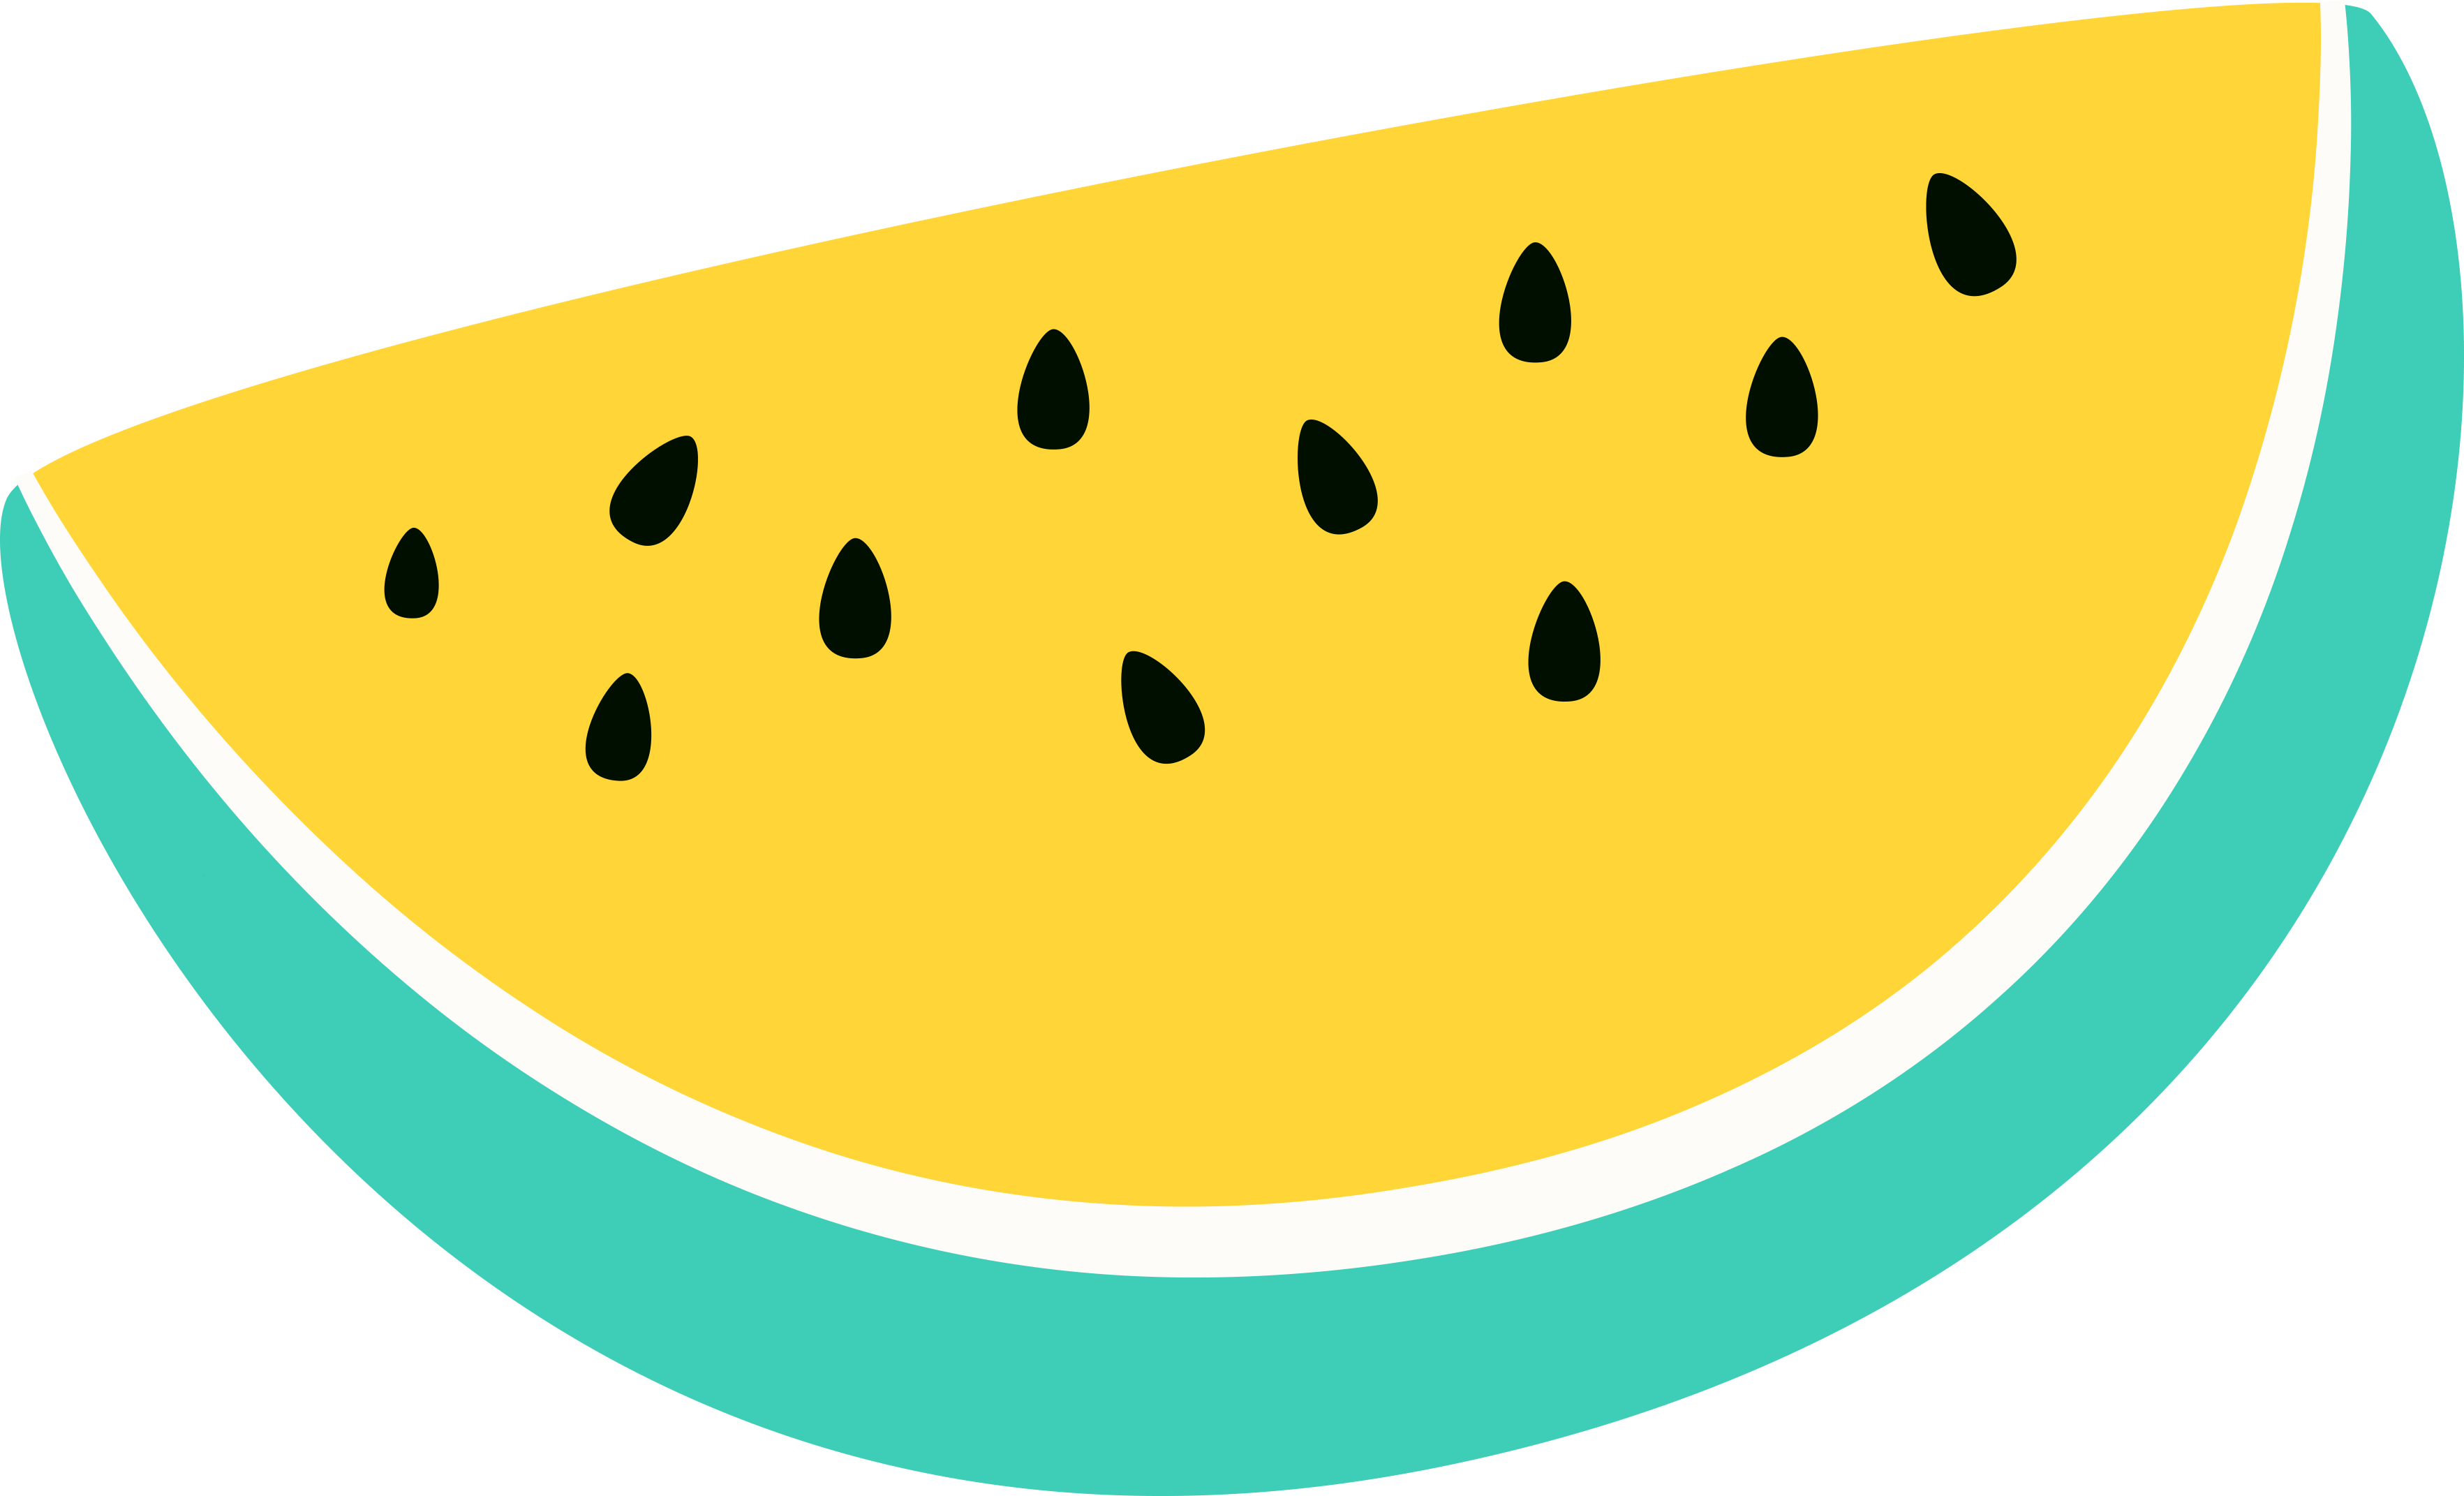 Fun top wallpapers with. Watermelon clipart cut